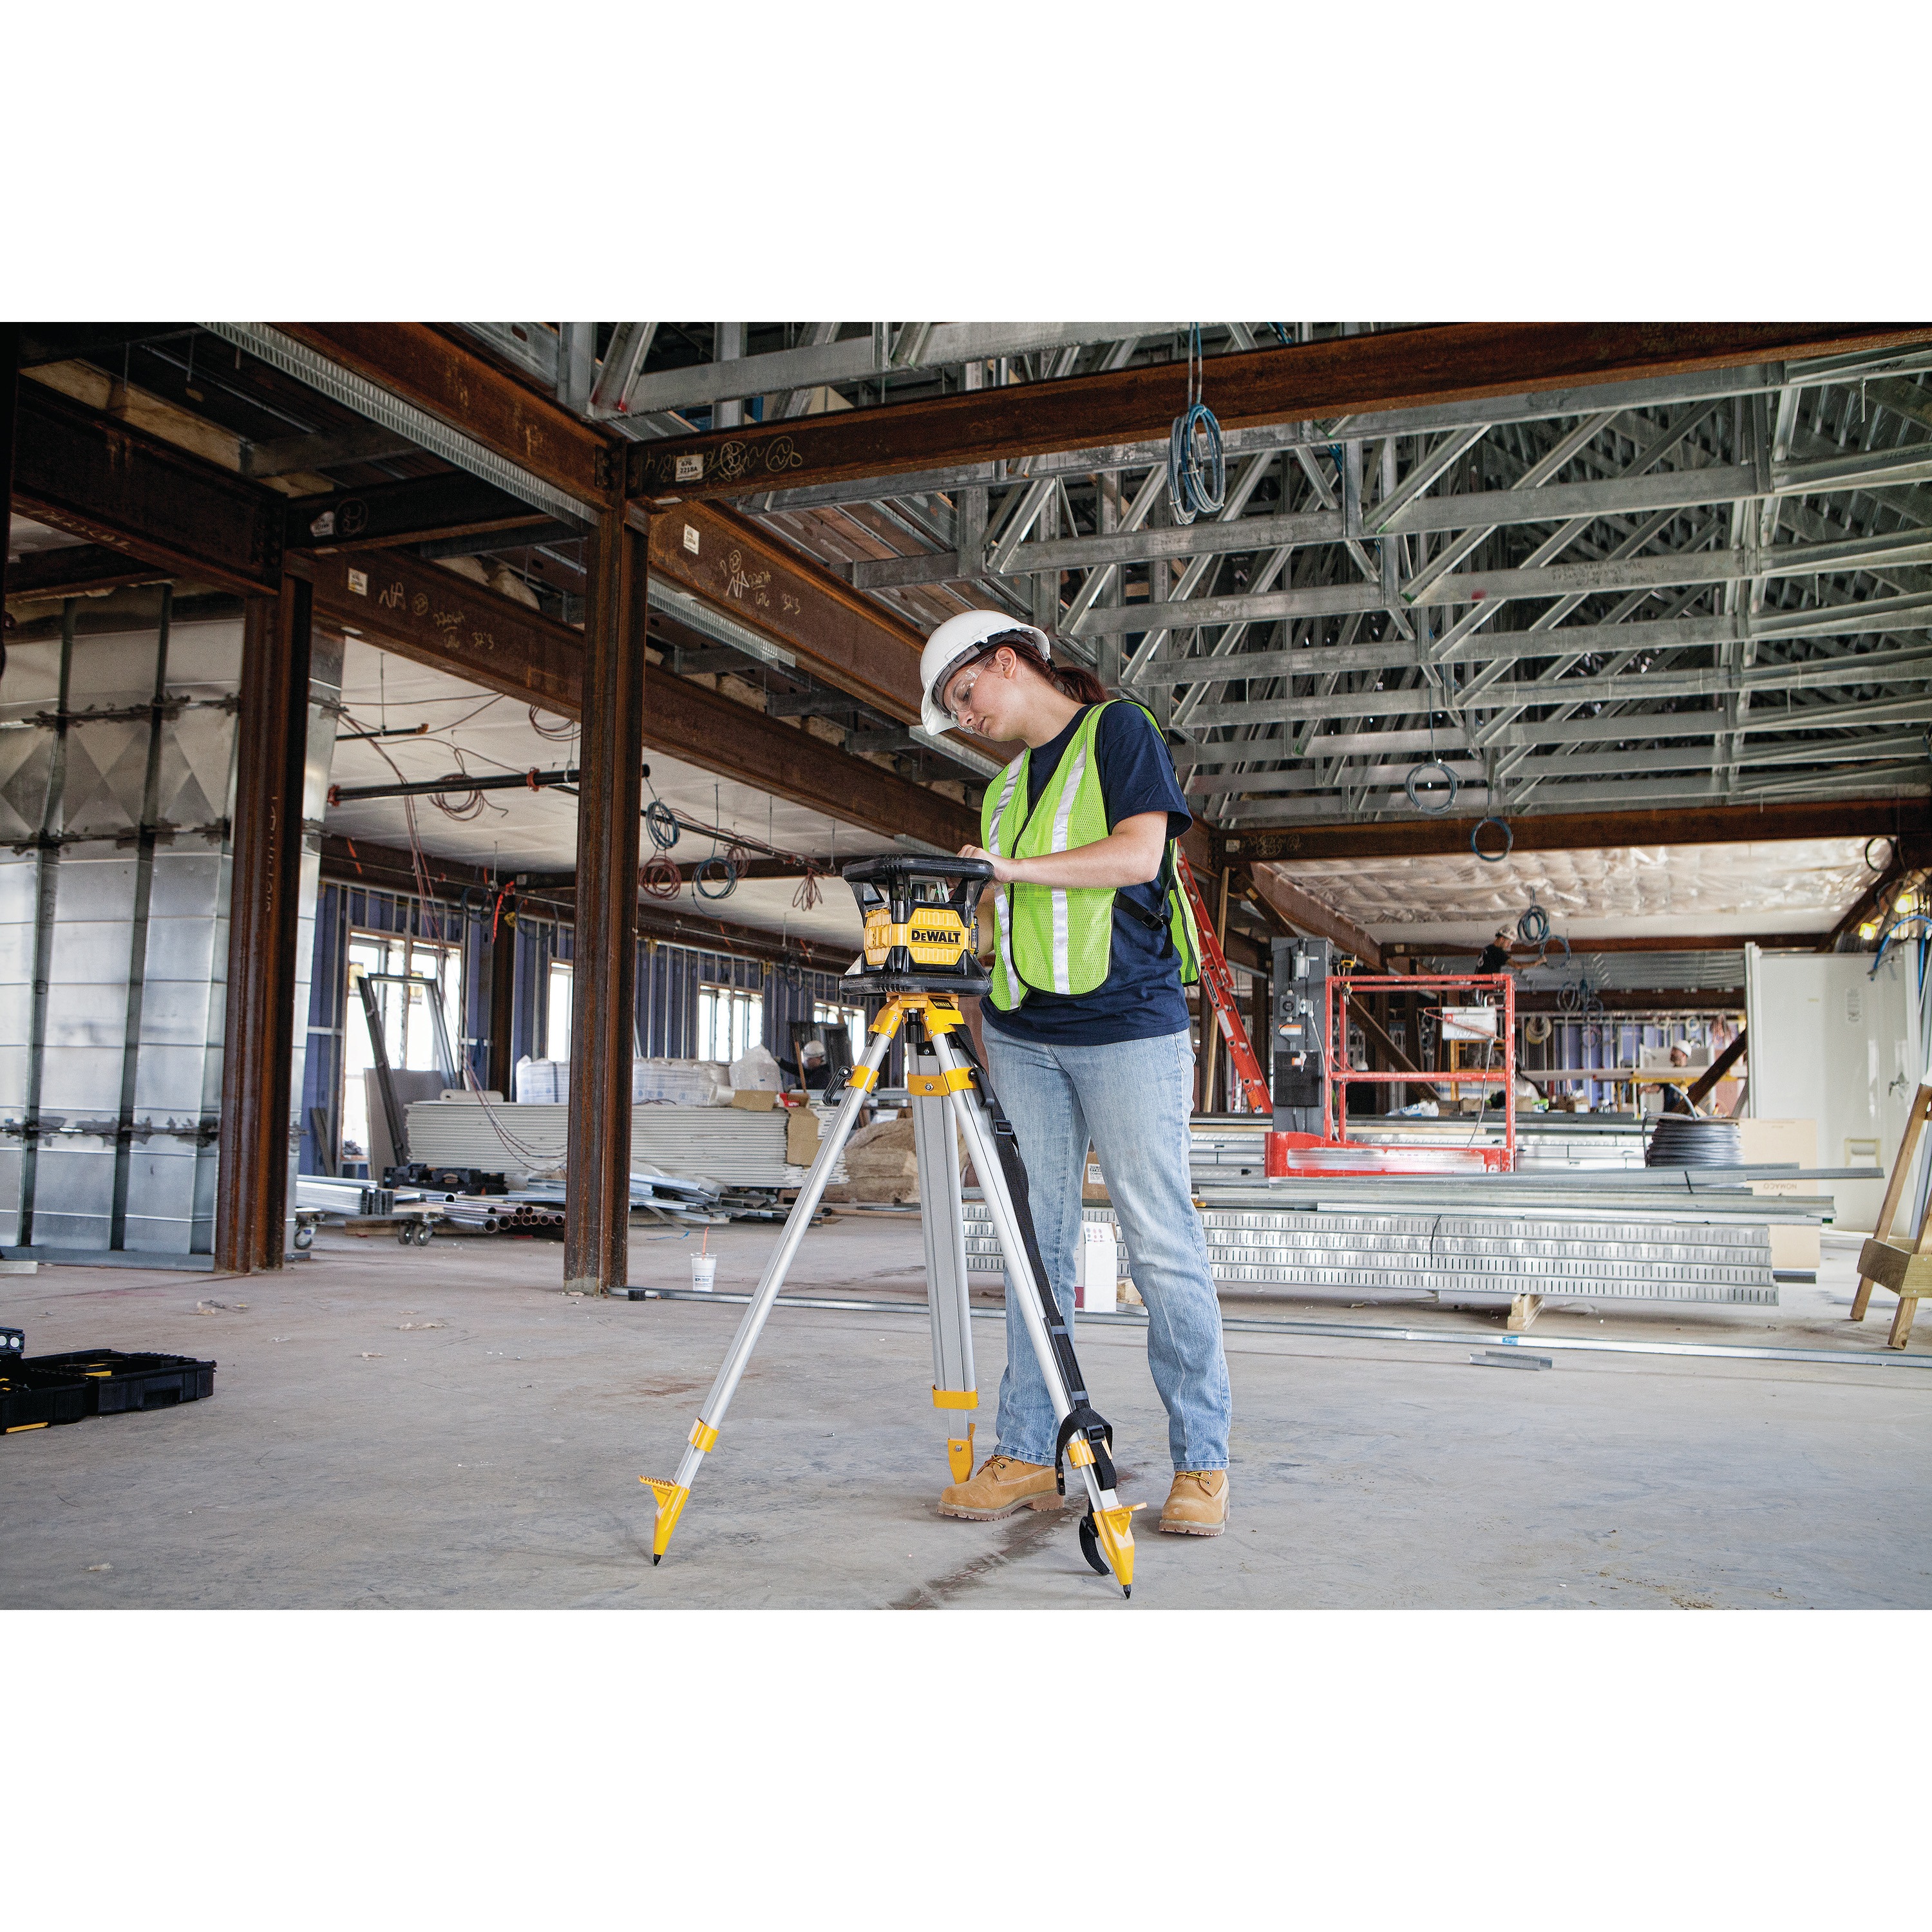 Red rotary tough laser mounted on a tripod being used by a construction worker.